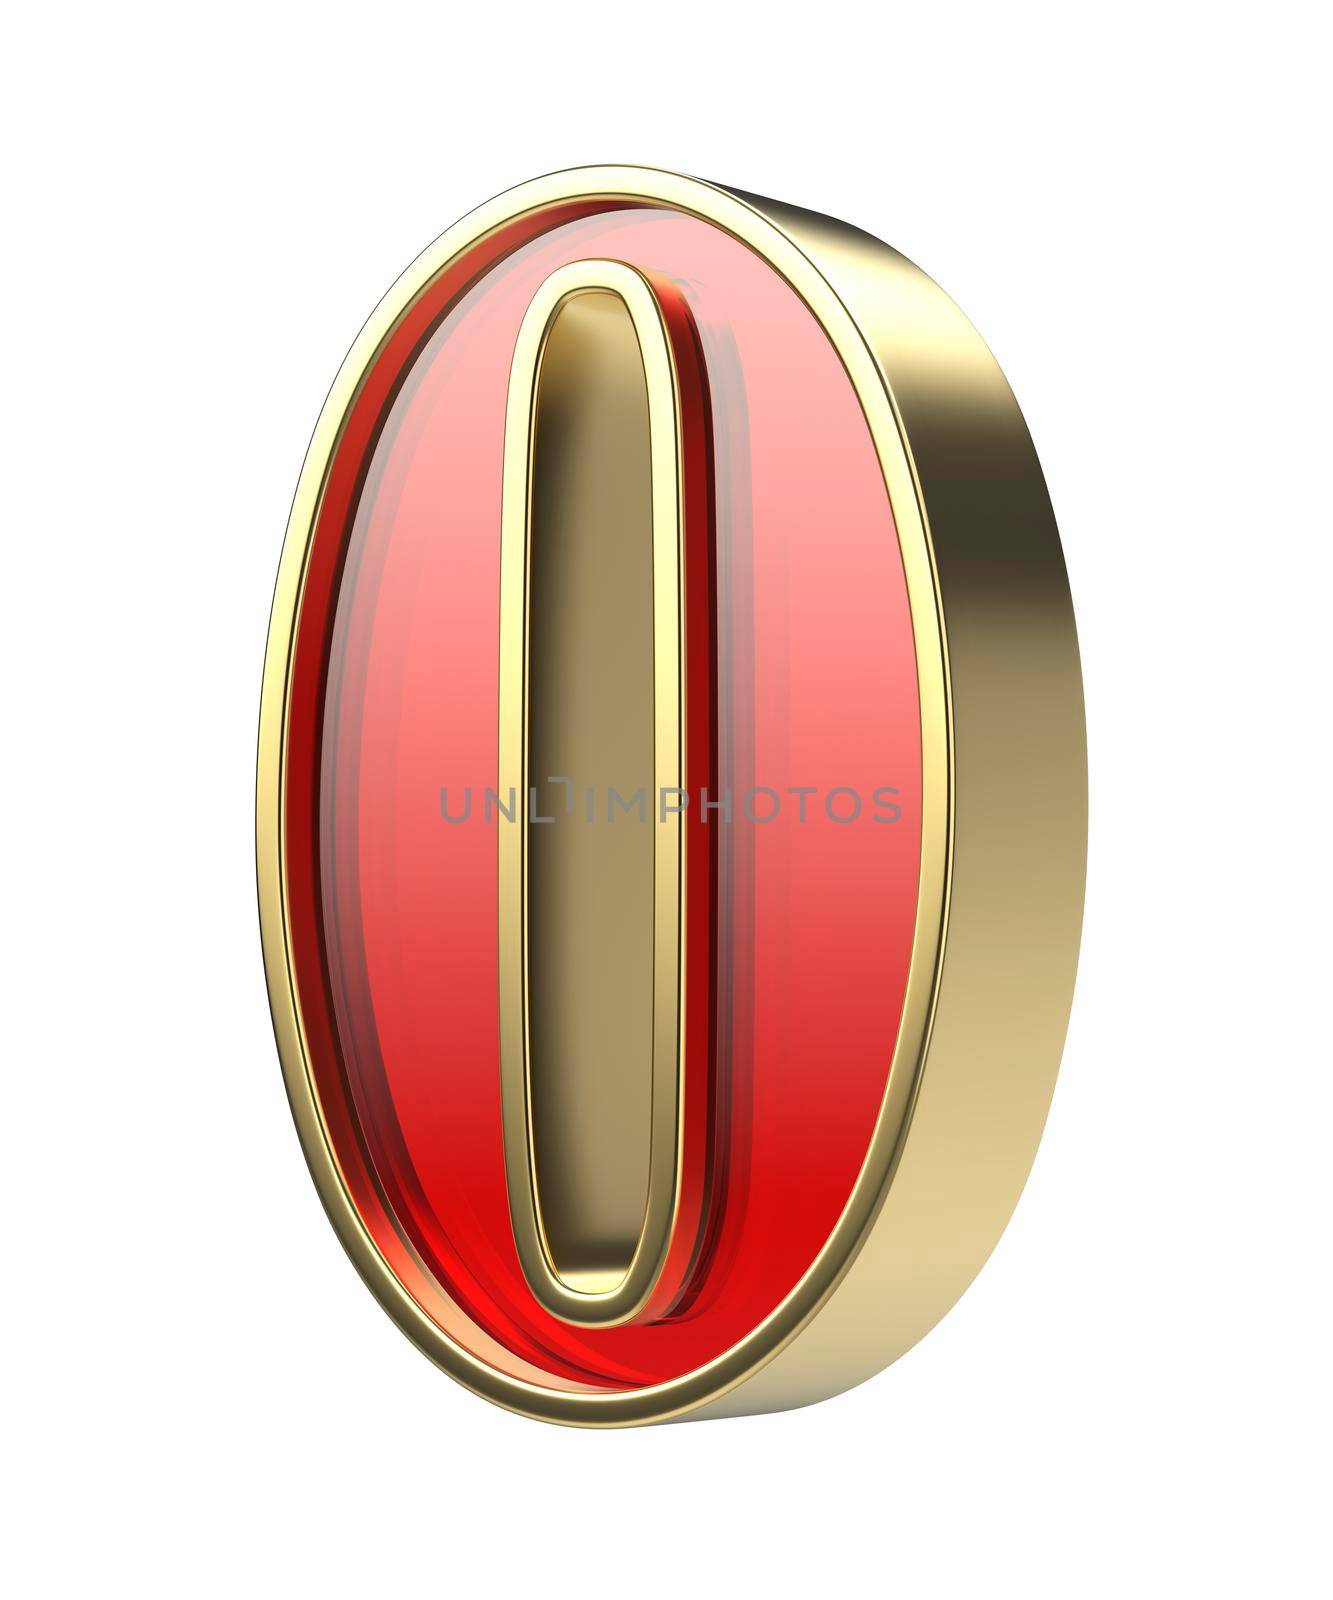 Number zero with golden frame and red glass, isolated on white background